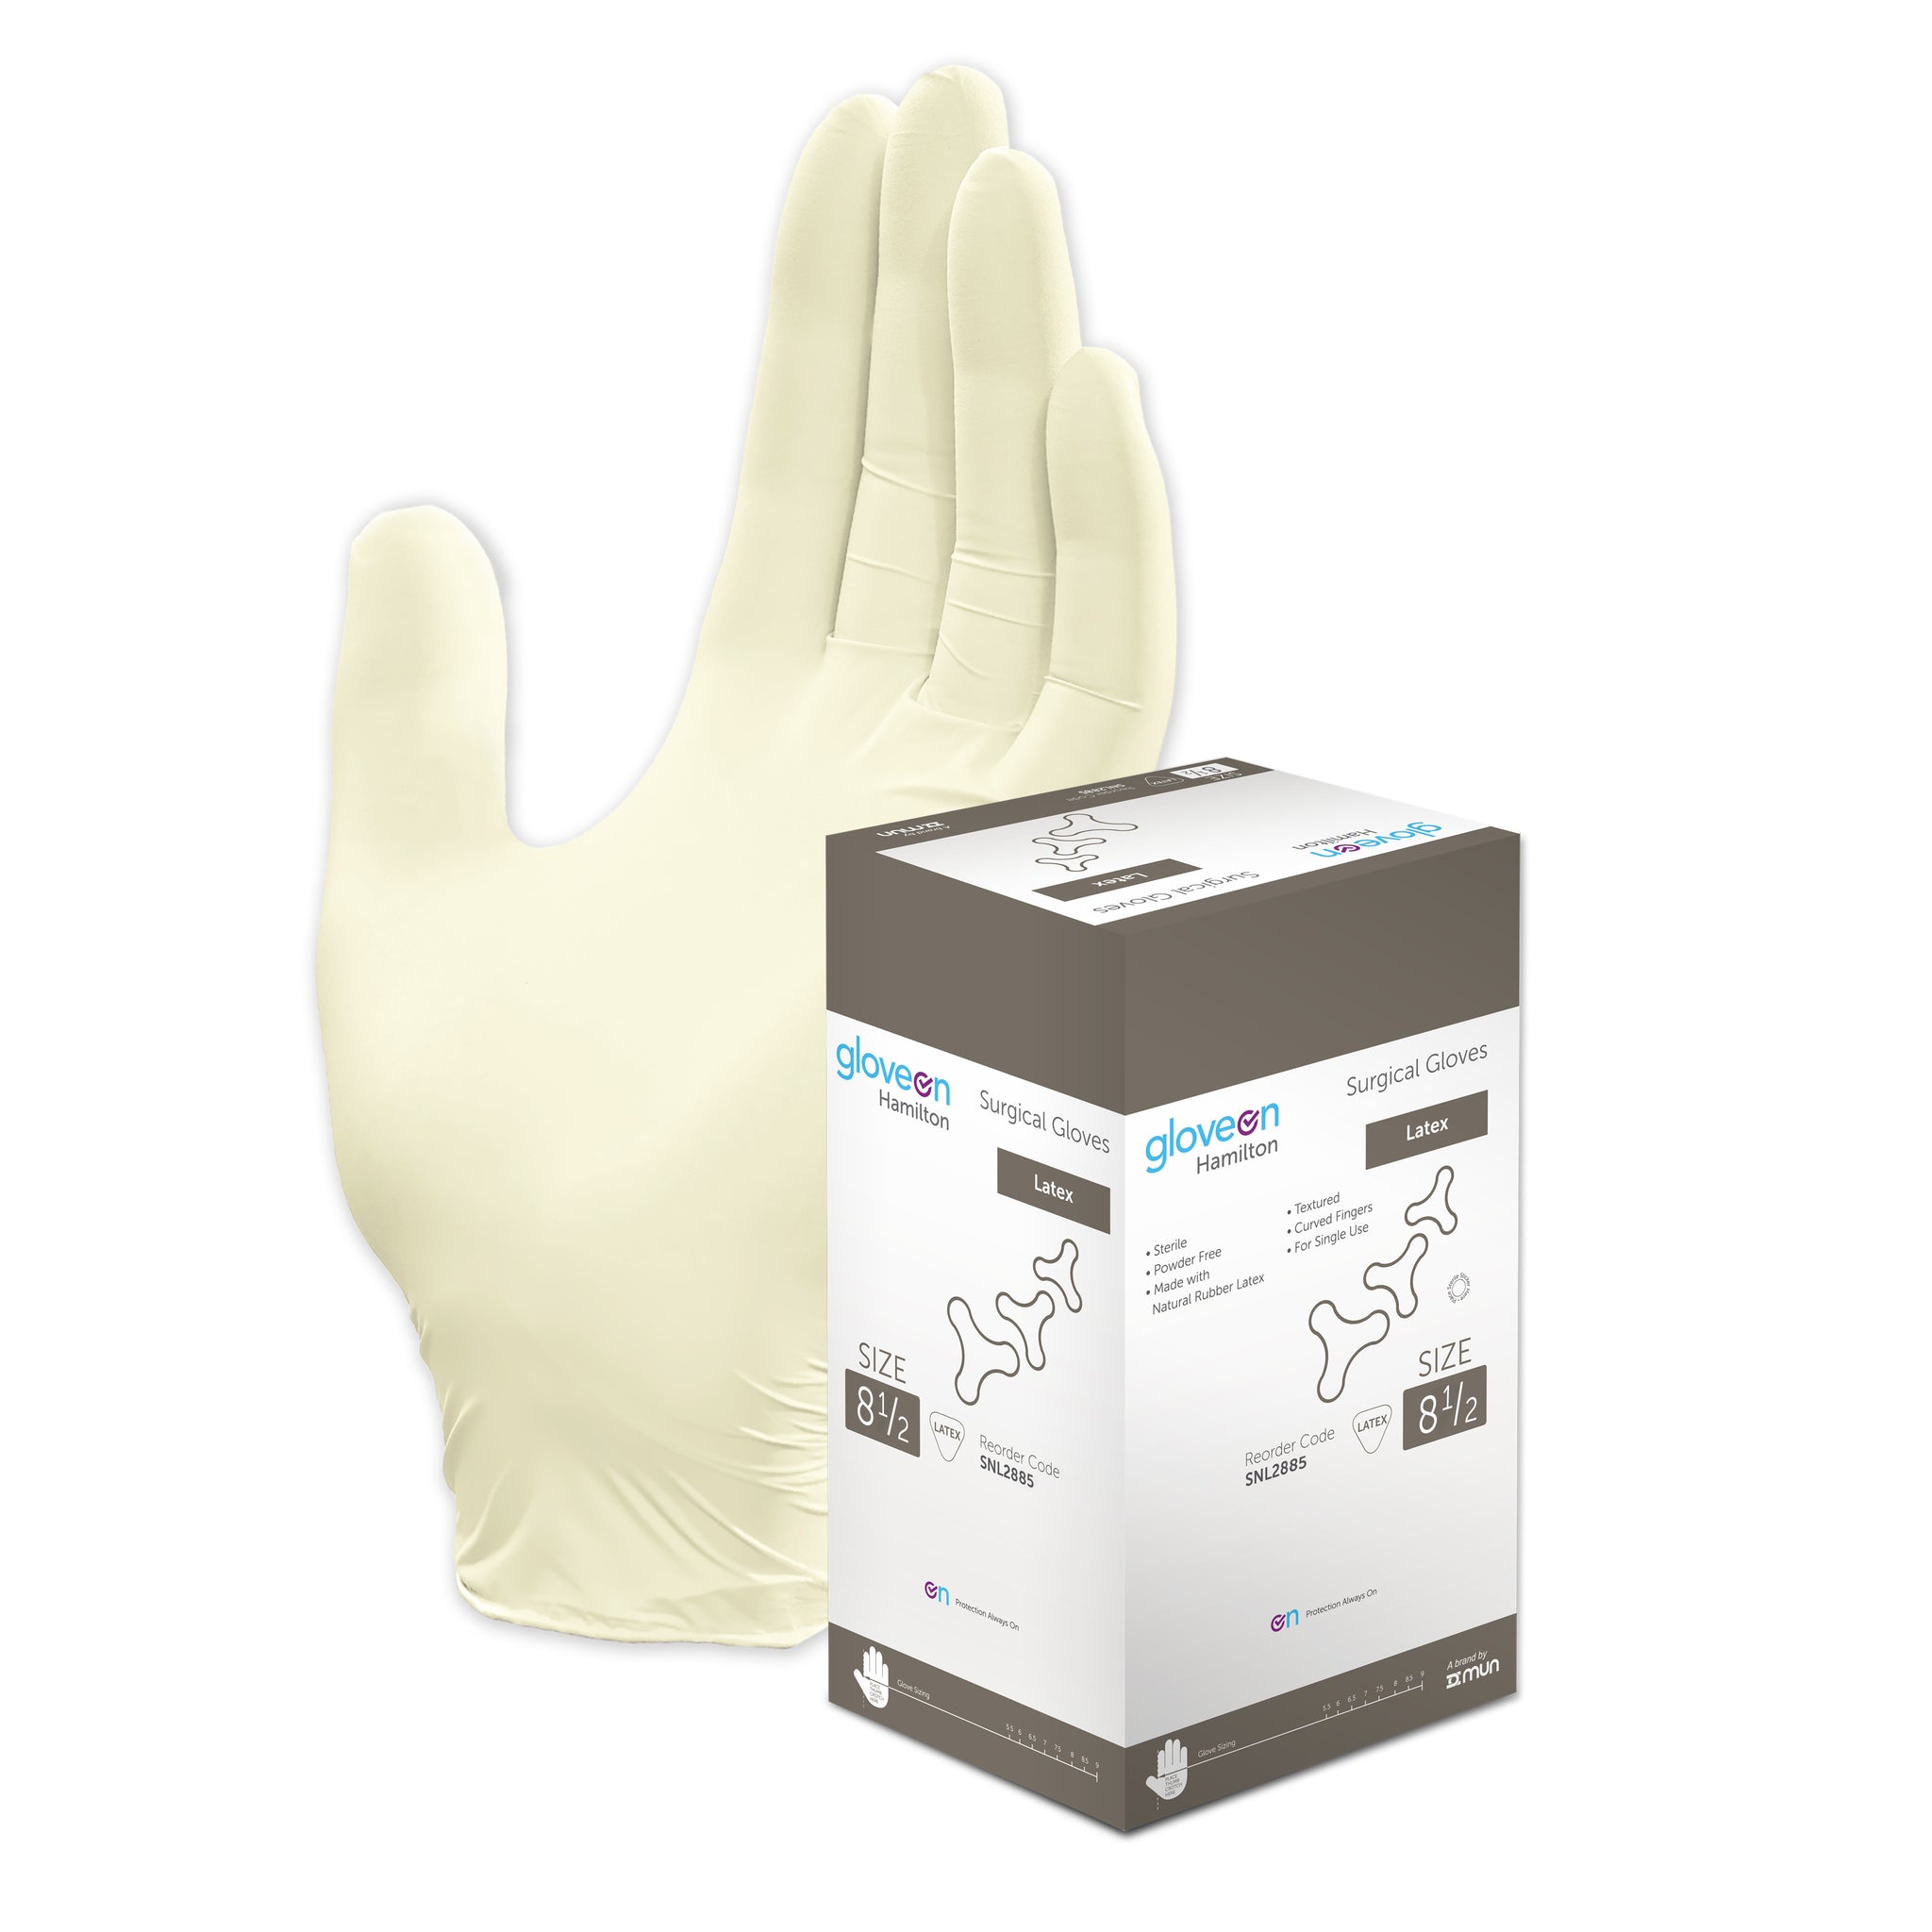 Latex, Powder Free, Textured, Curved Fingers, Sterile, Natural Colour - Box of 100, 8.5